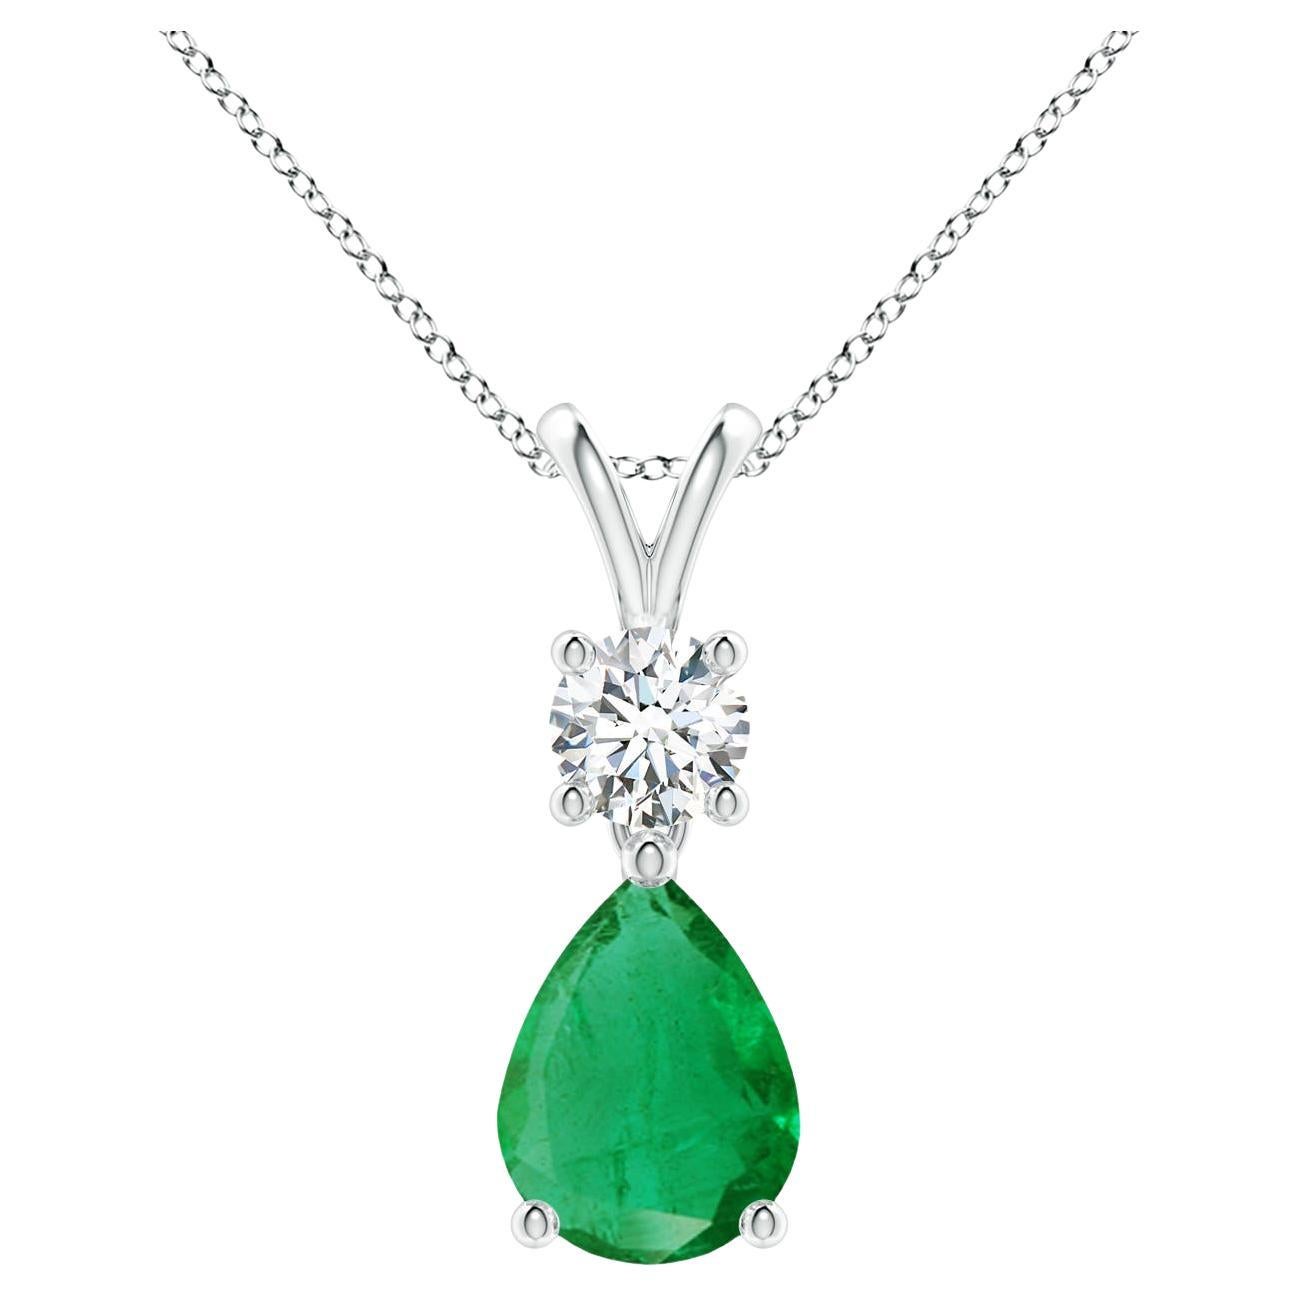 Natural Pear-Shaped Emerald V-Bale Pendant in 14K White Gold Size-8x6mm